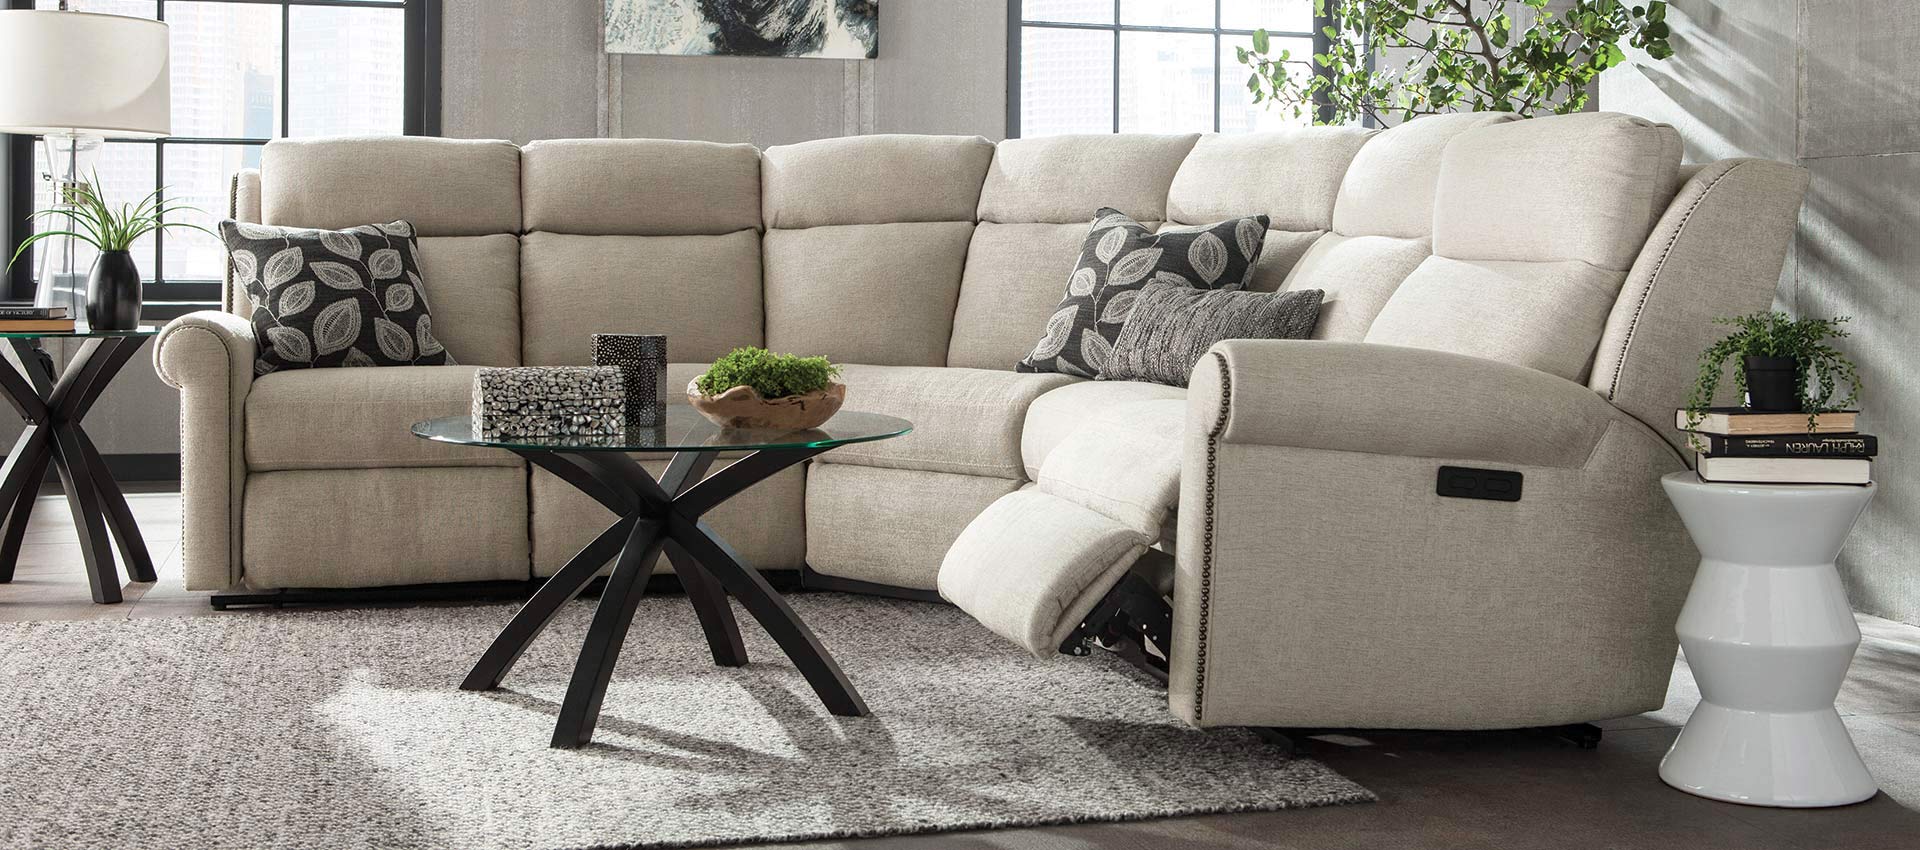 smith brothers fabric sectional